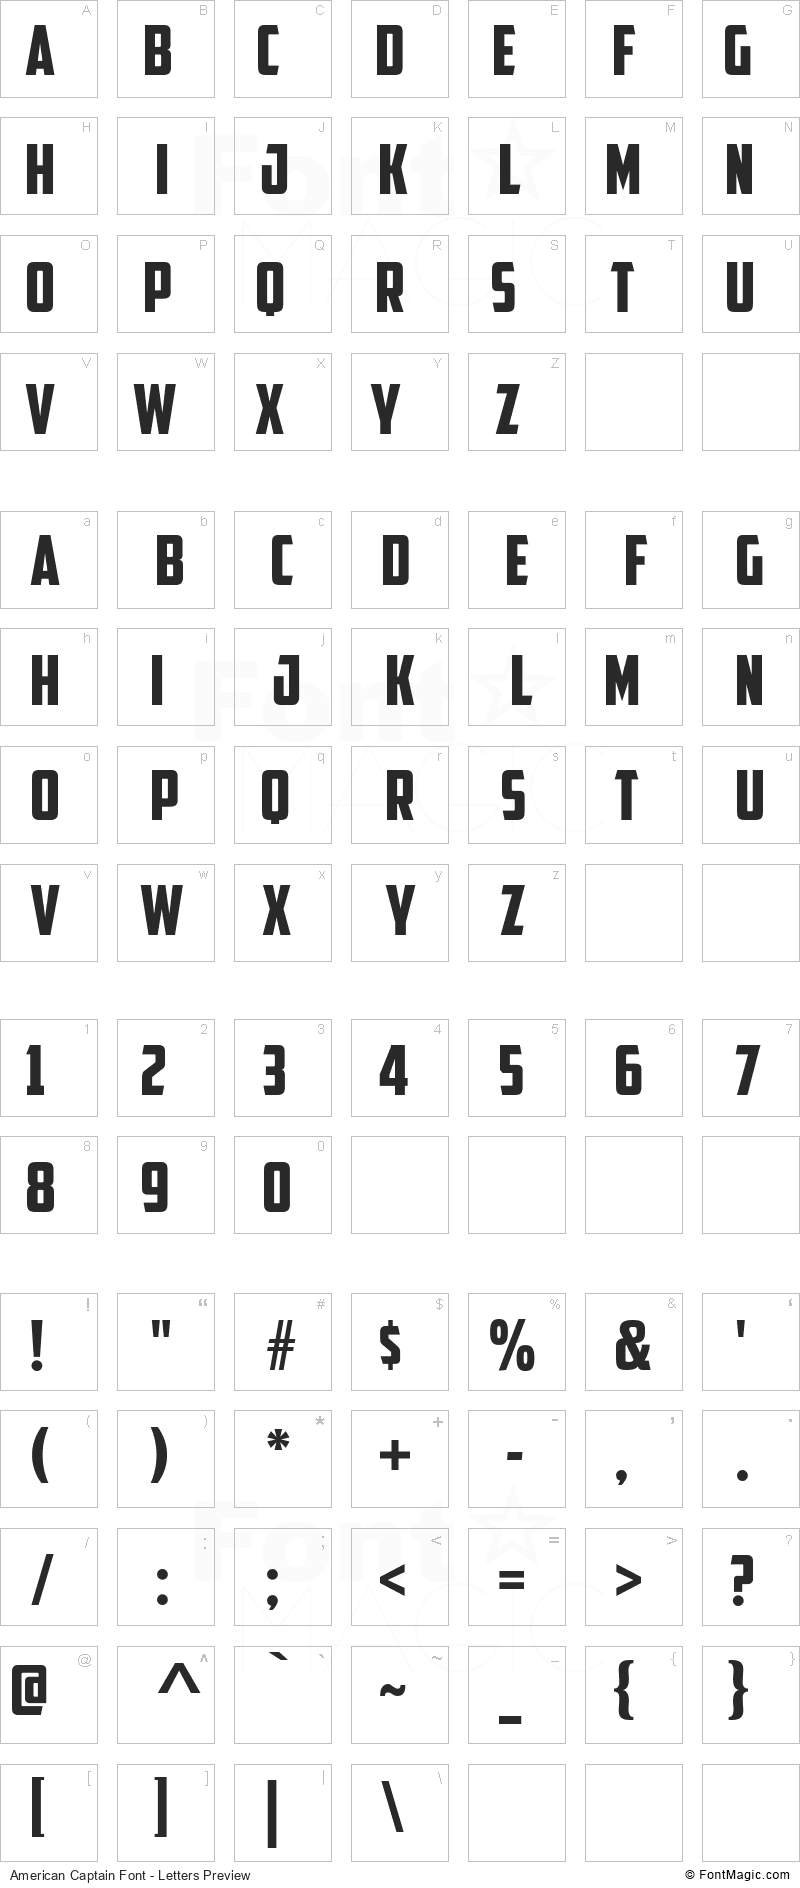 American Captain Font - All Latters Preview Chart